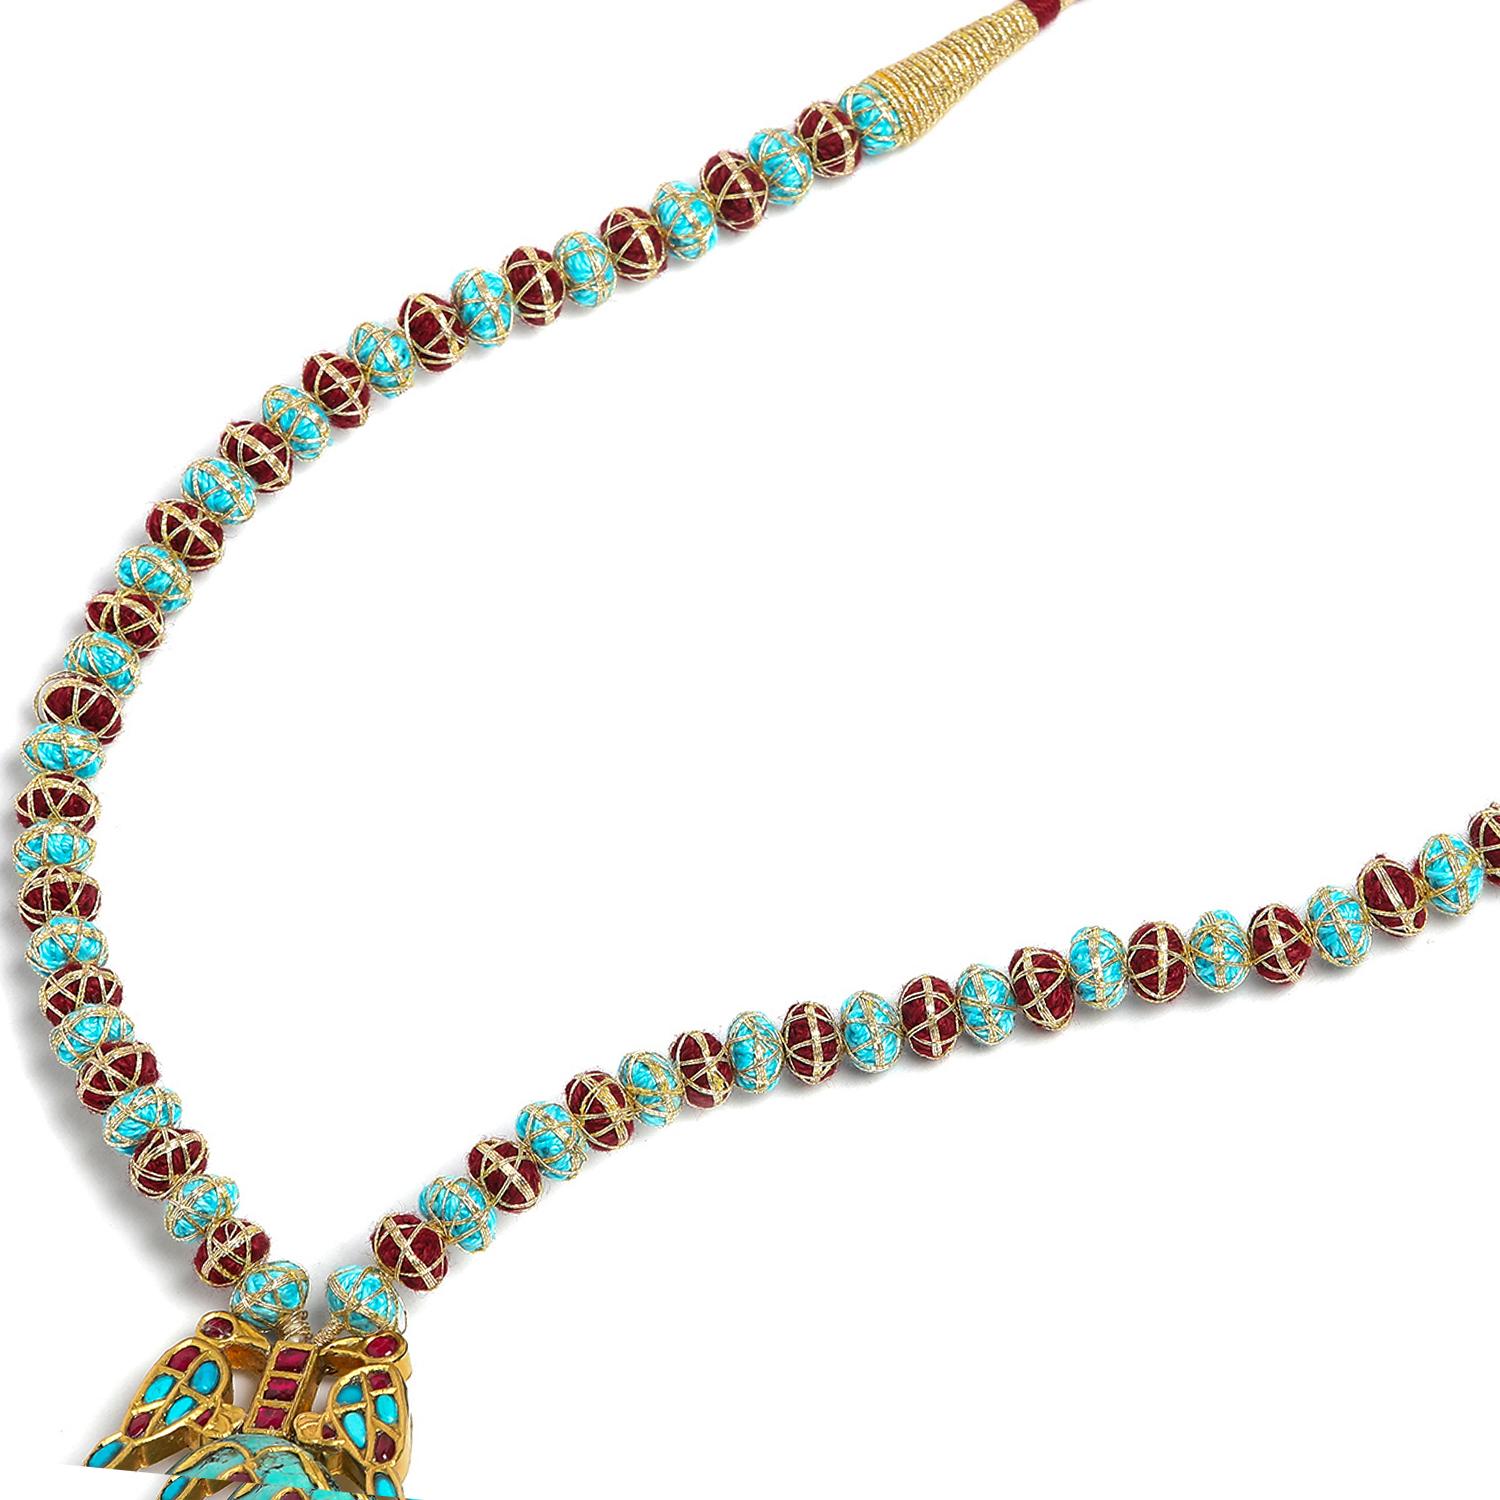 Rough Cut Gold Polki Necklace With Turquoise And Ruby - Vintage Intention For Sale